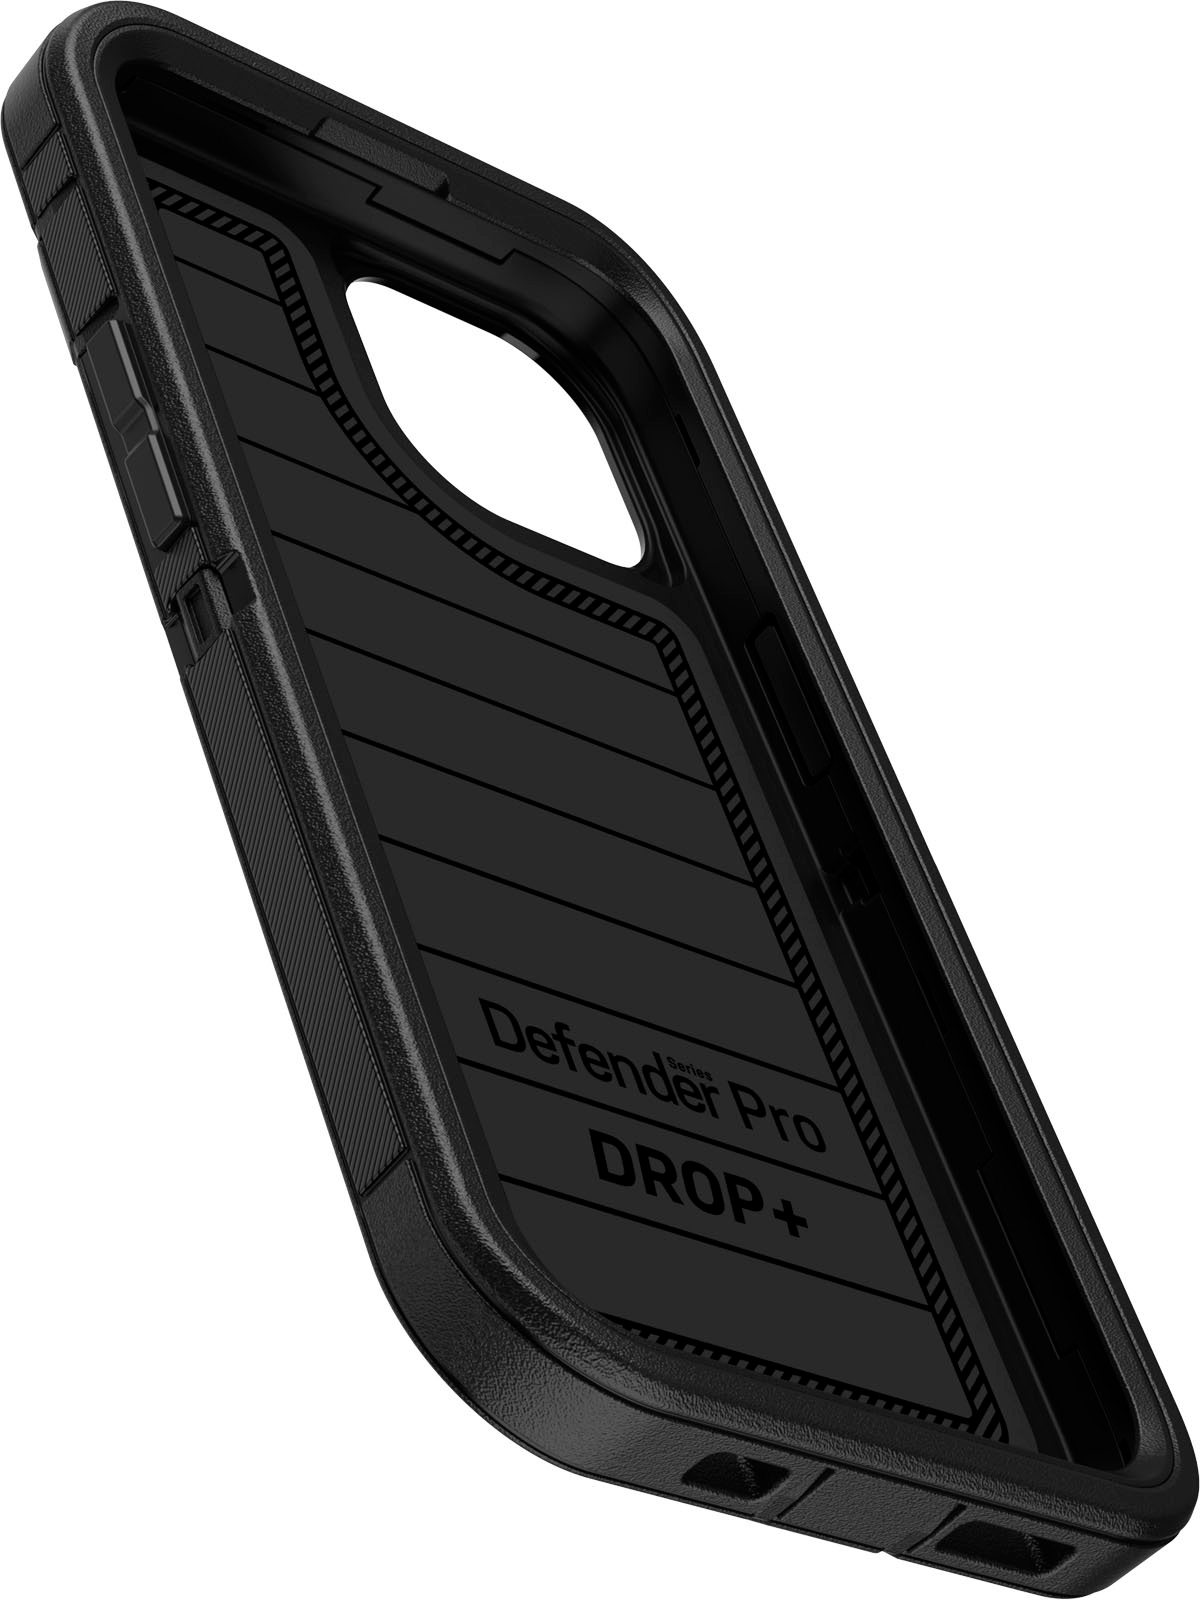 OtterBox Defender Series Case for iPhone 13 Mini in Black